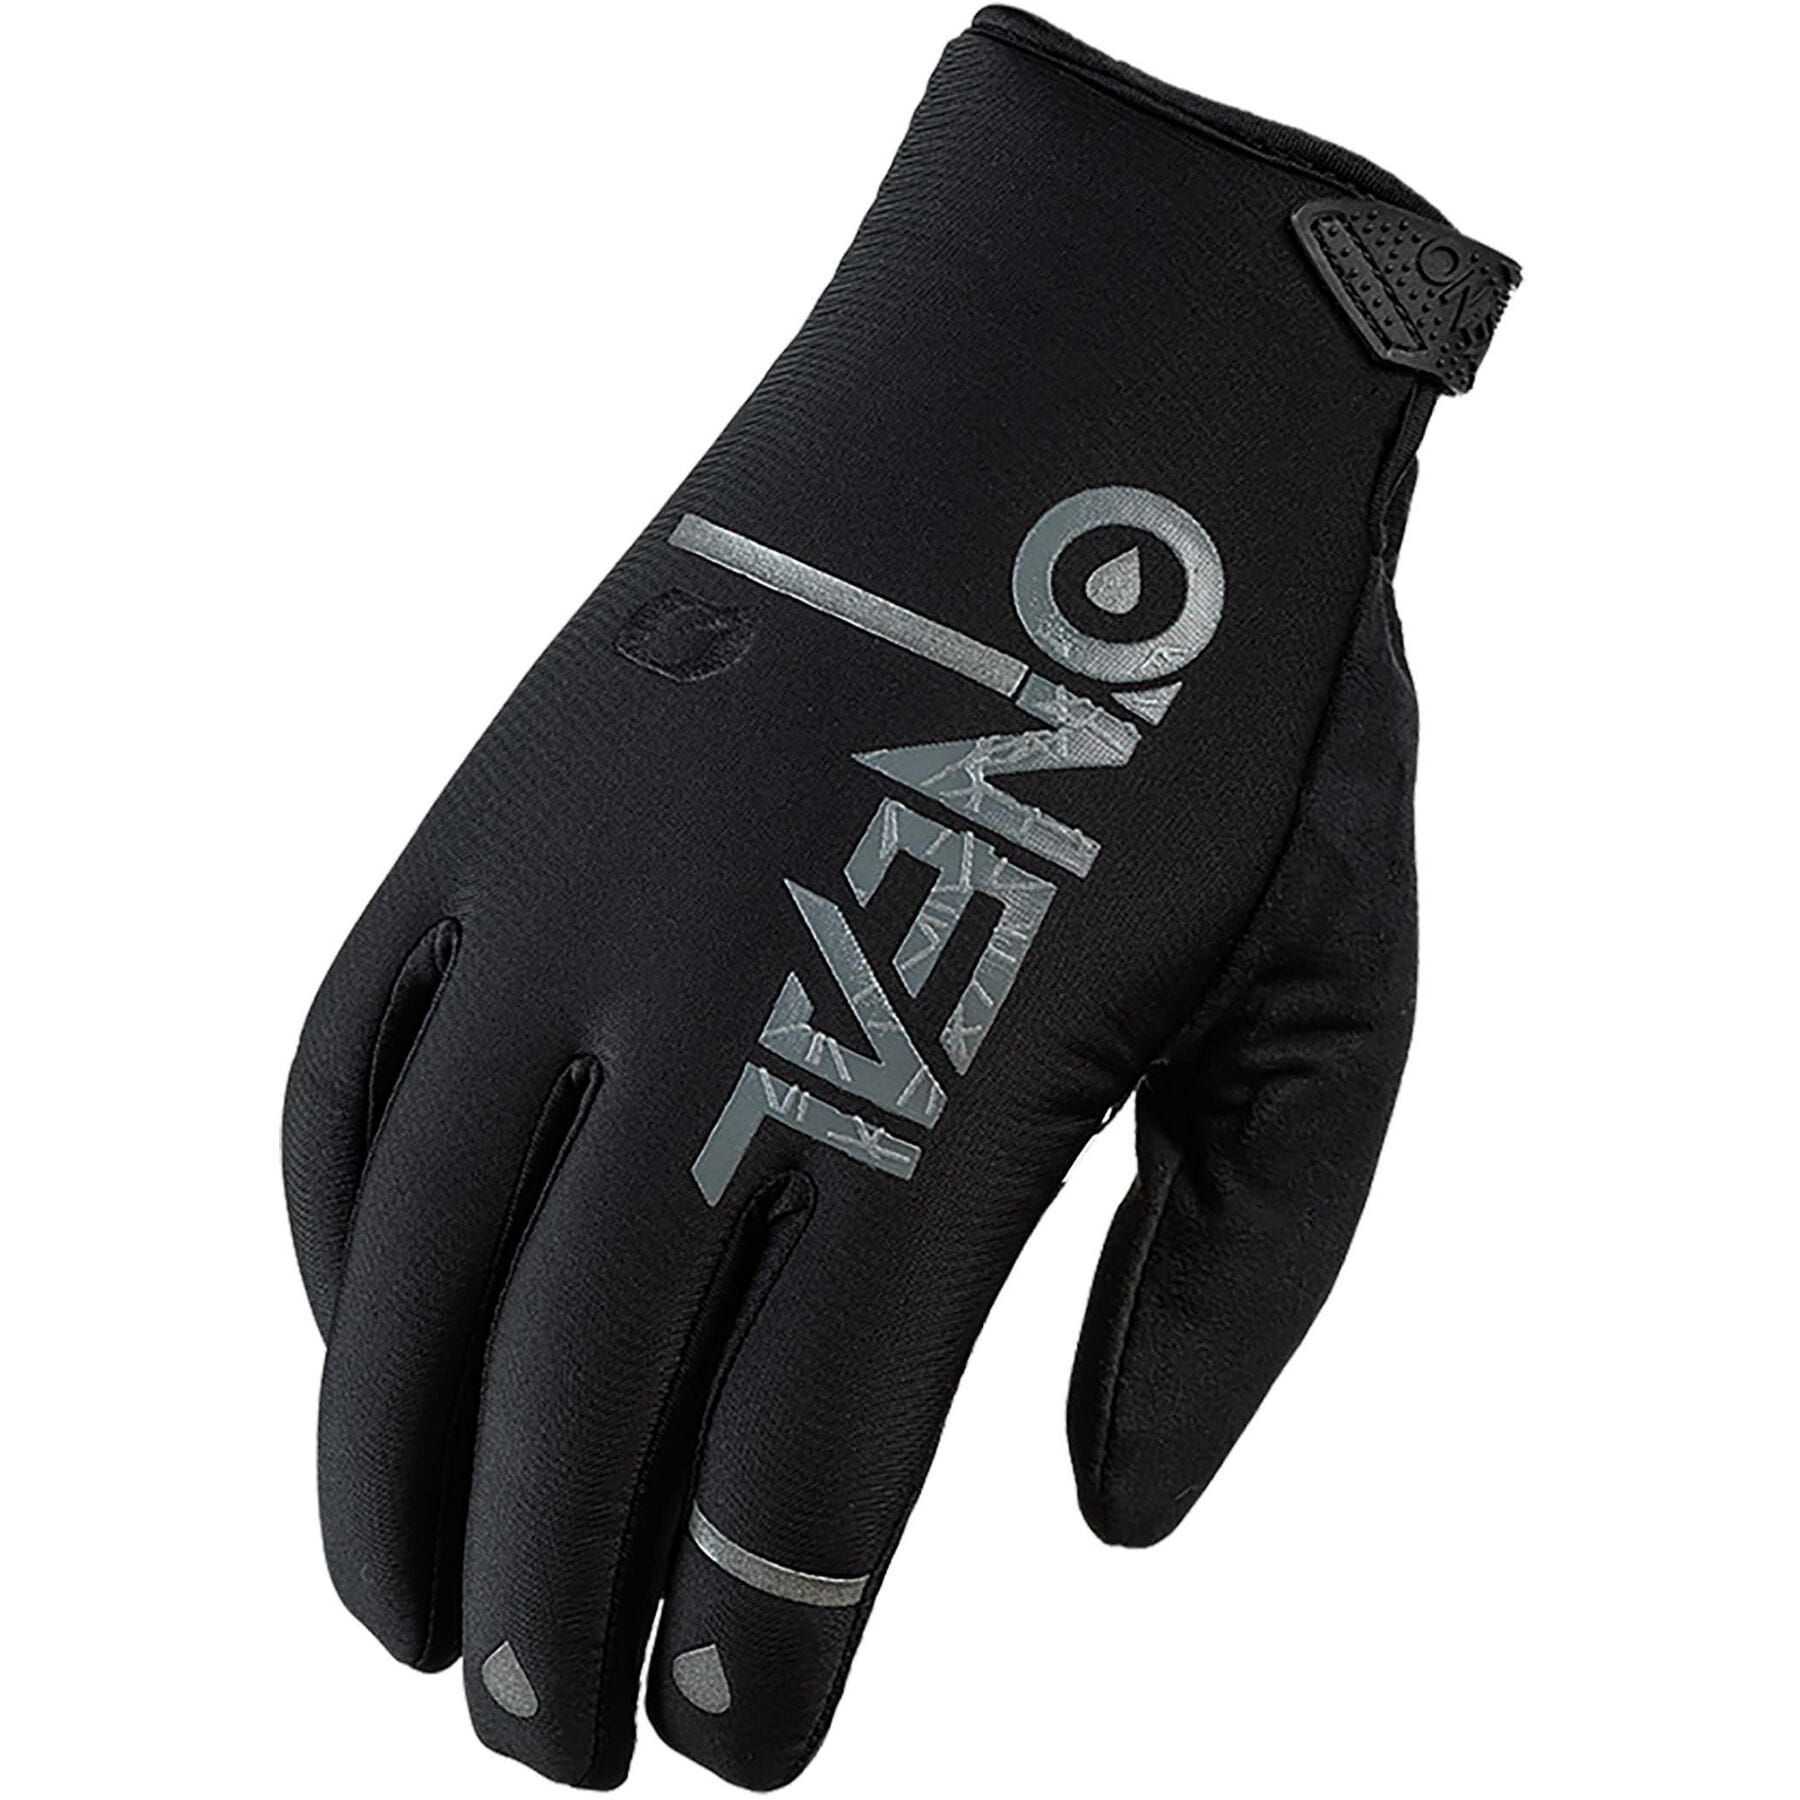 Black WINTER WP Gloves size M/8.5 displayed on a white background